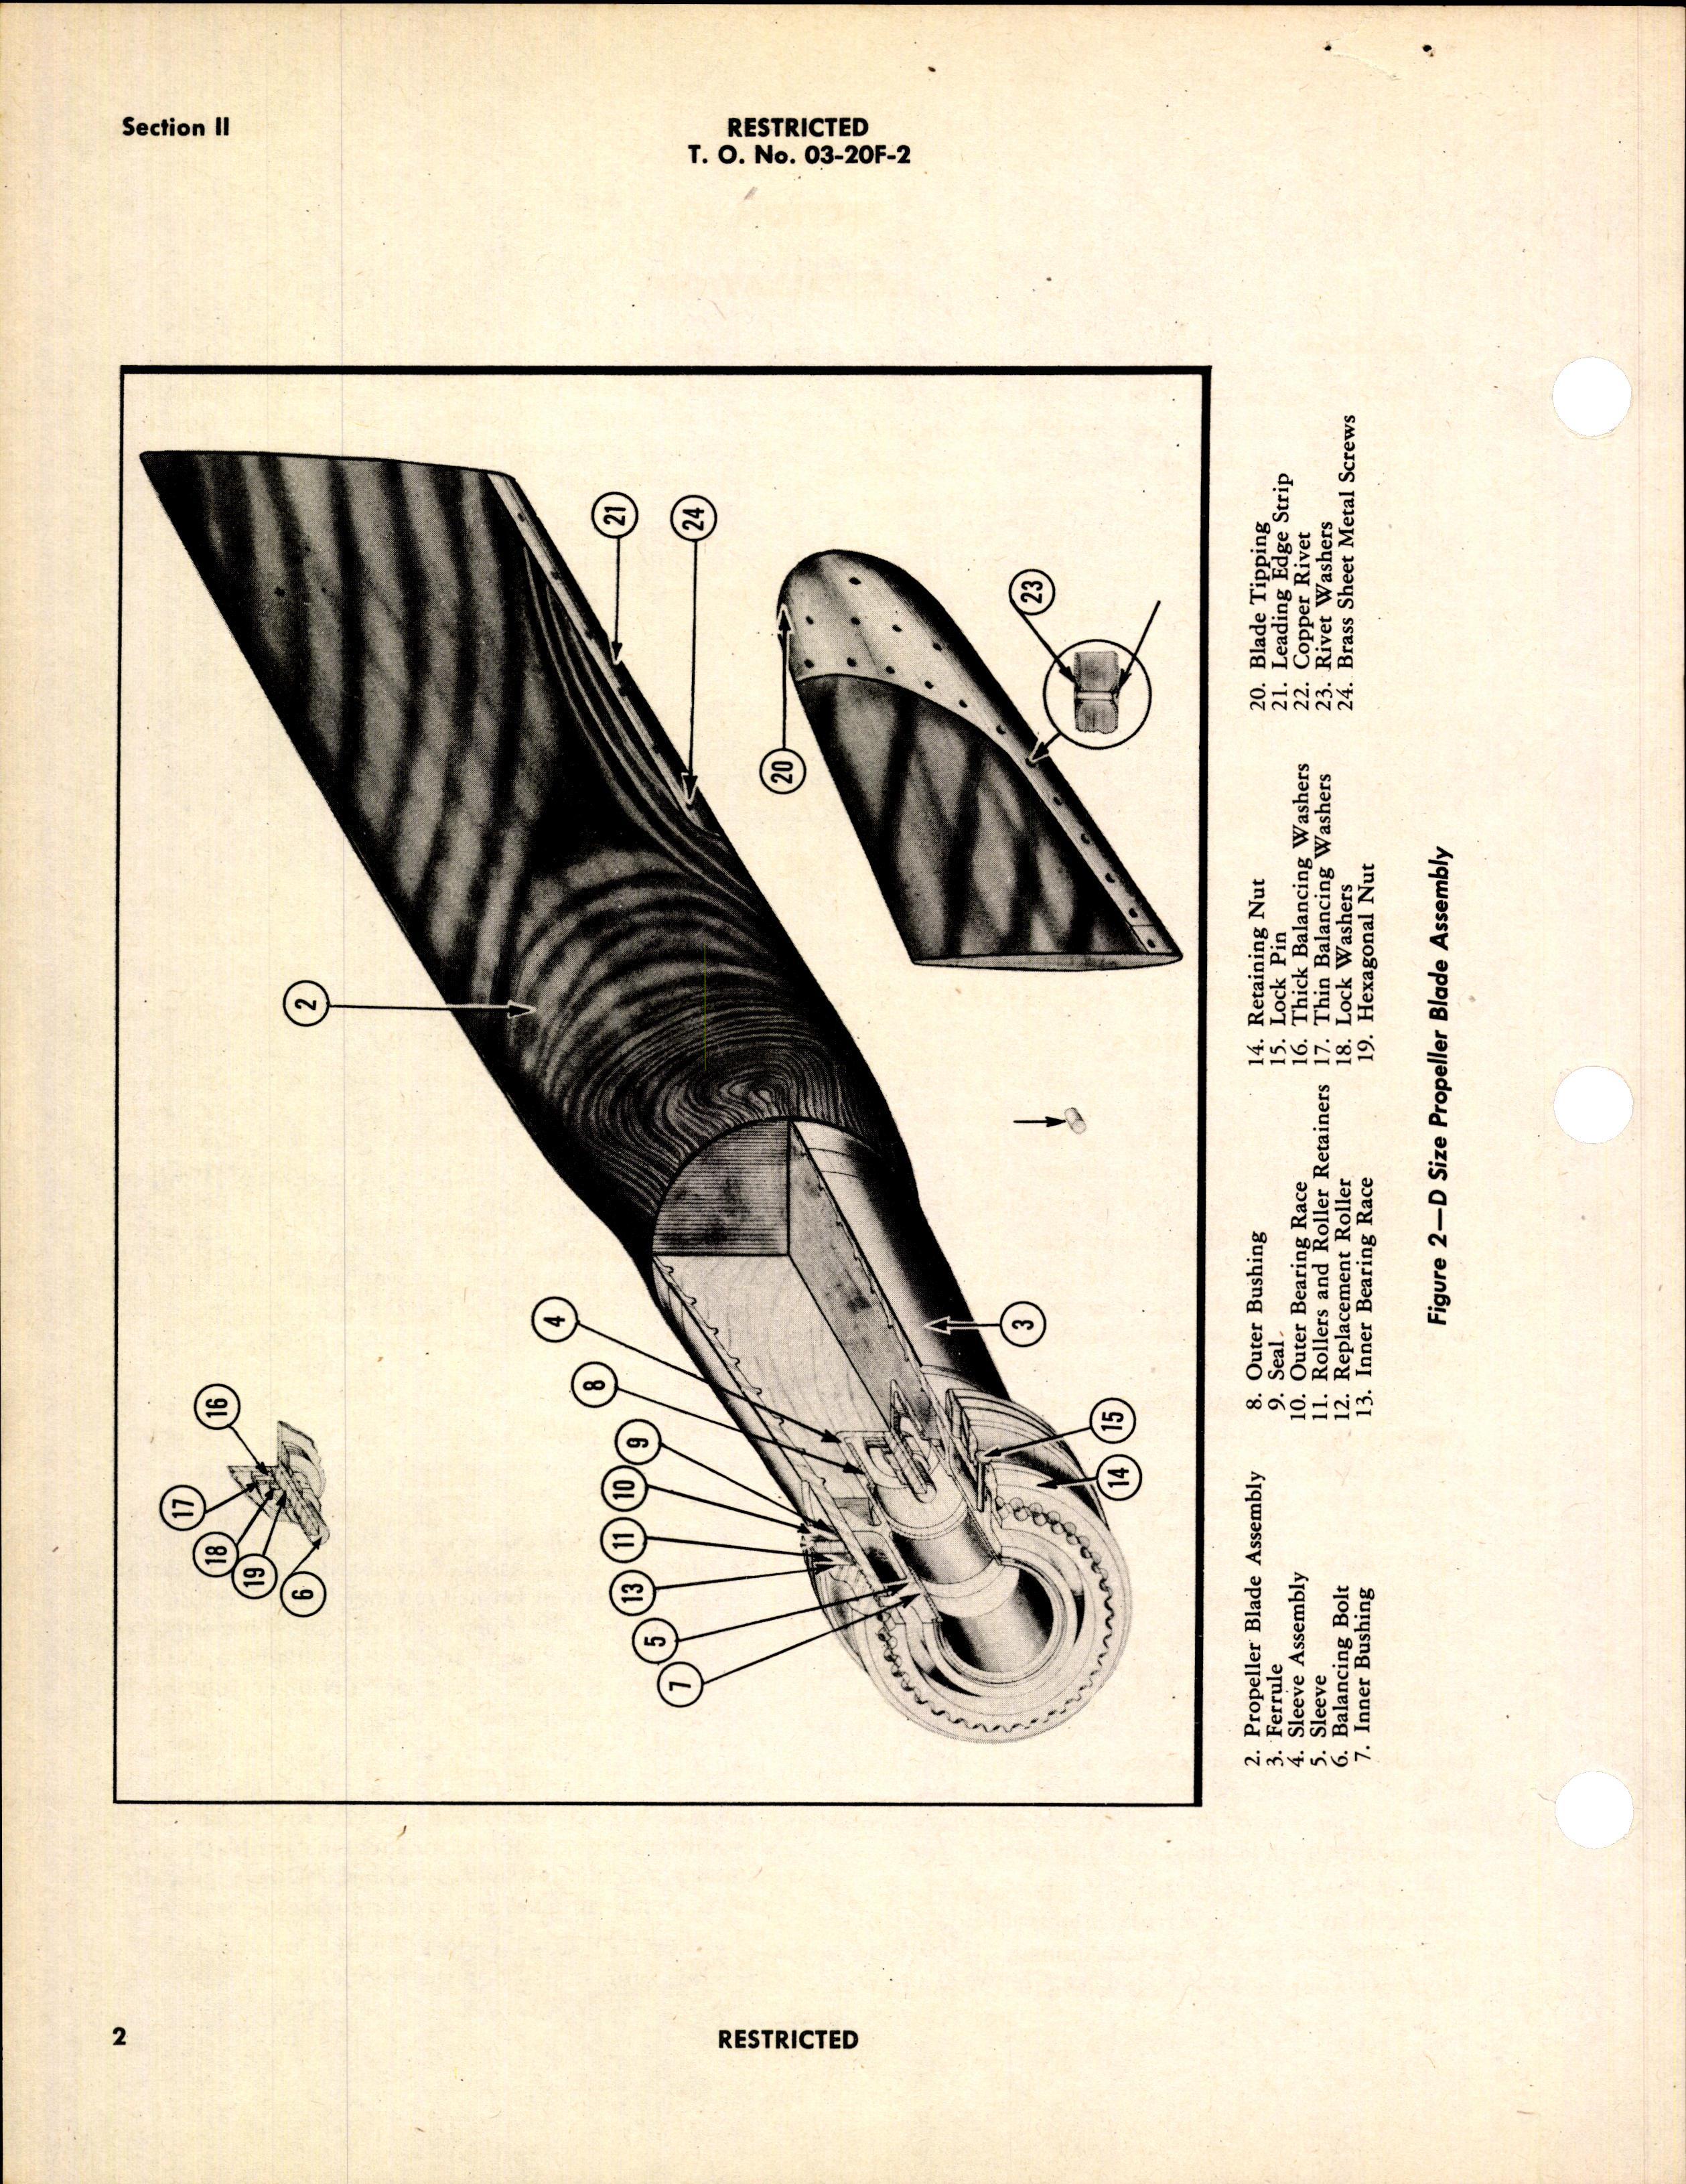 Sample page 6 from AirCorps Library document: Handbook of Instructions with Parts Catalog for Compreg Propeller Blades